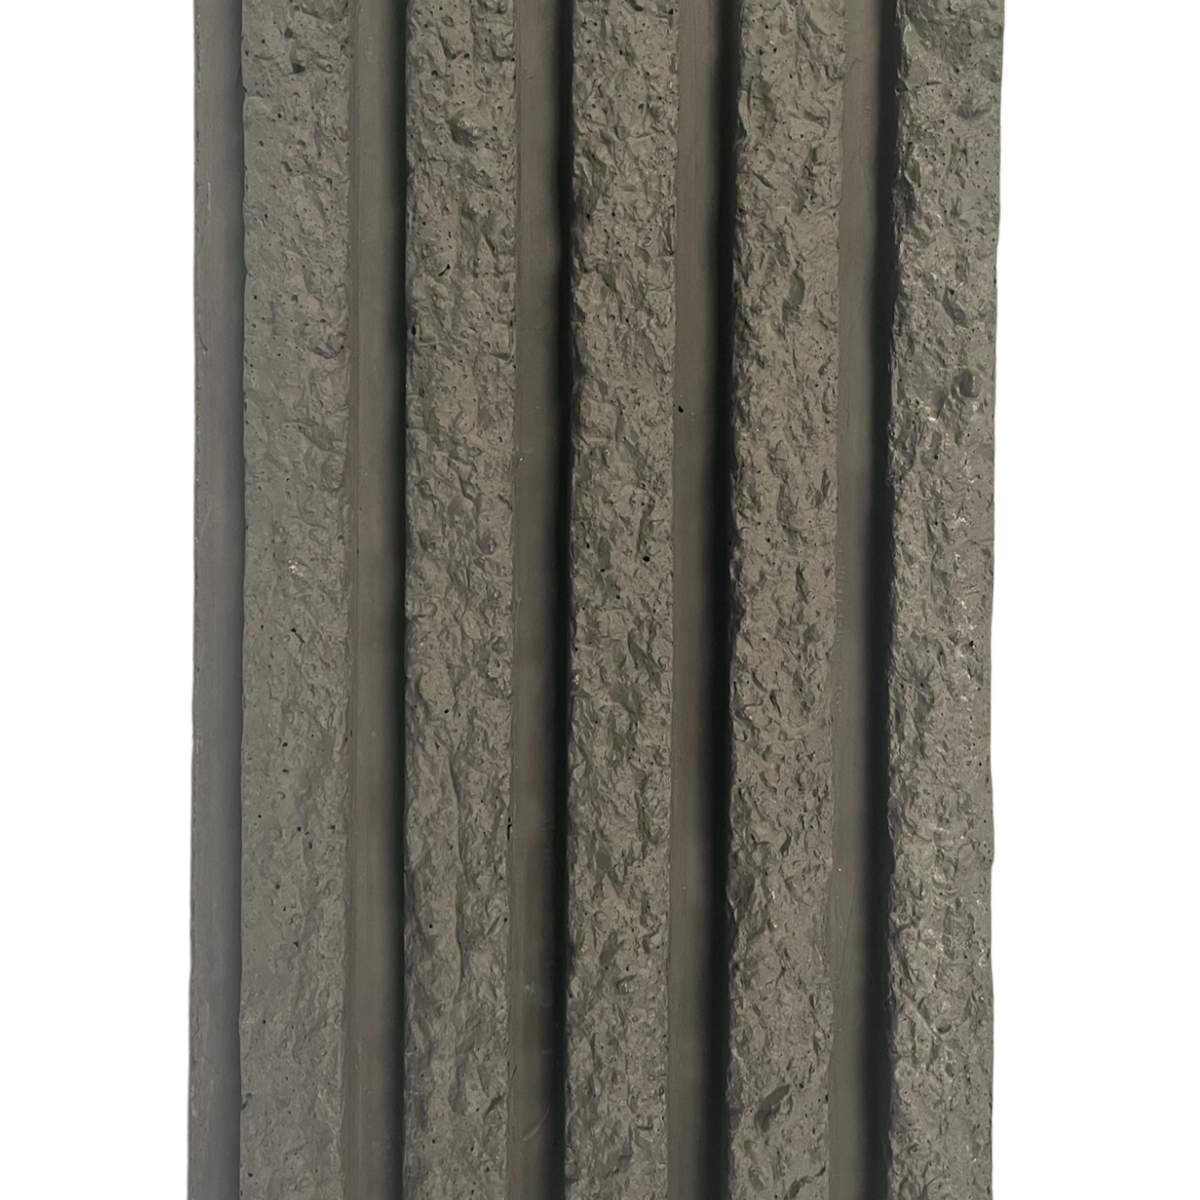 RealCast Fluted - Charcoal Sample